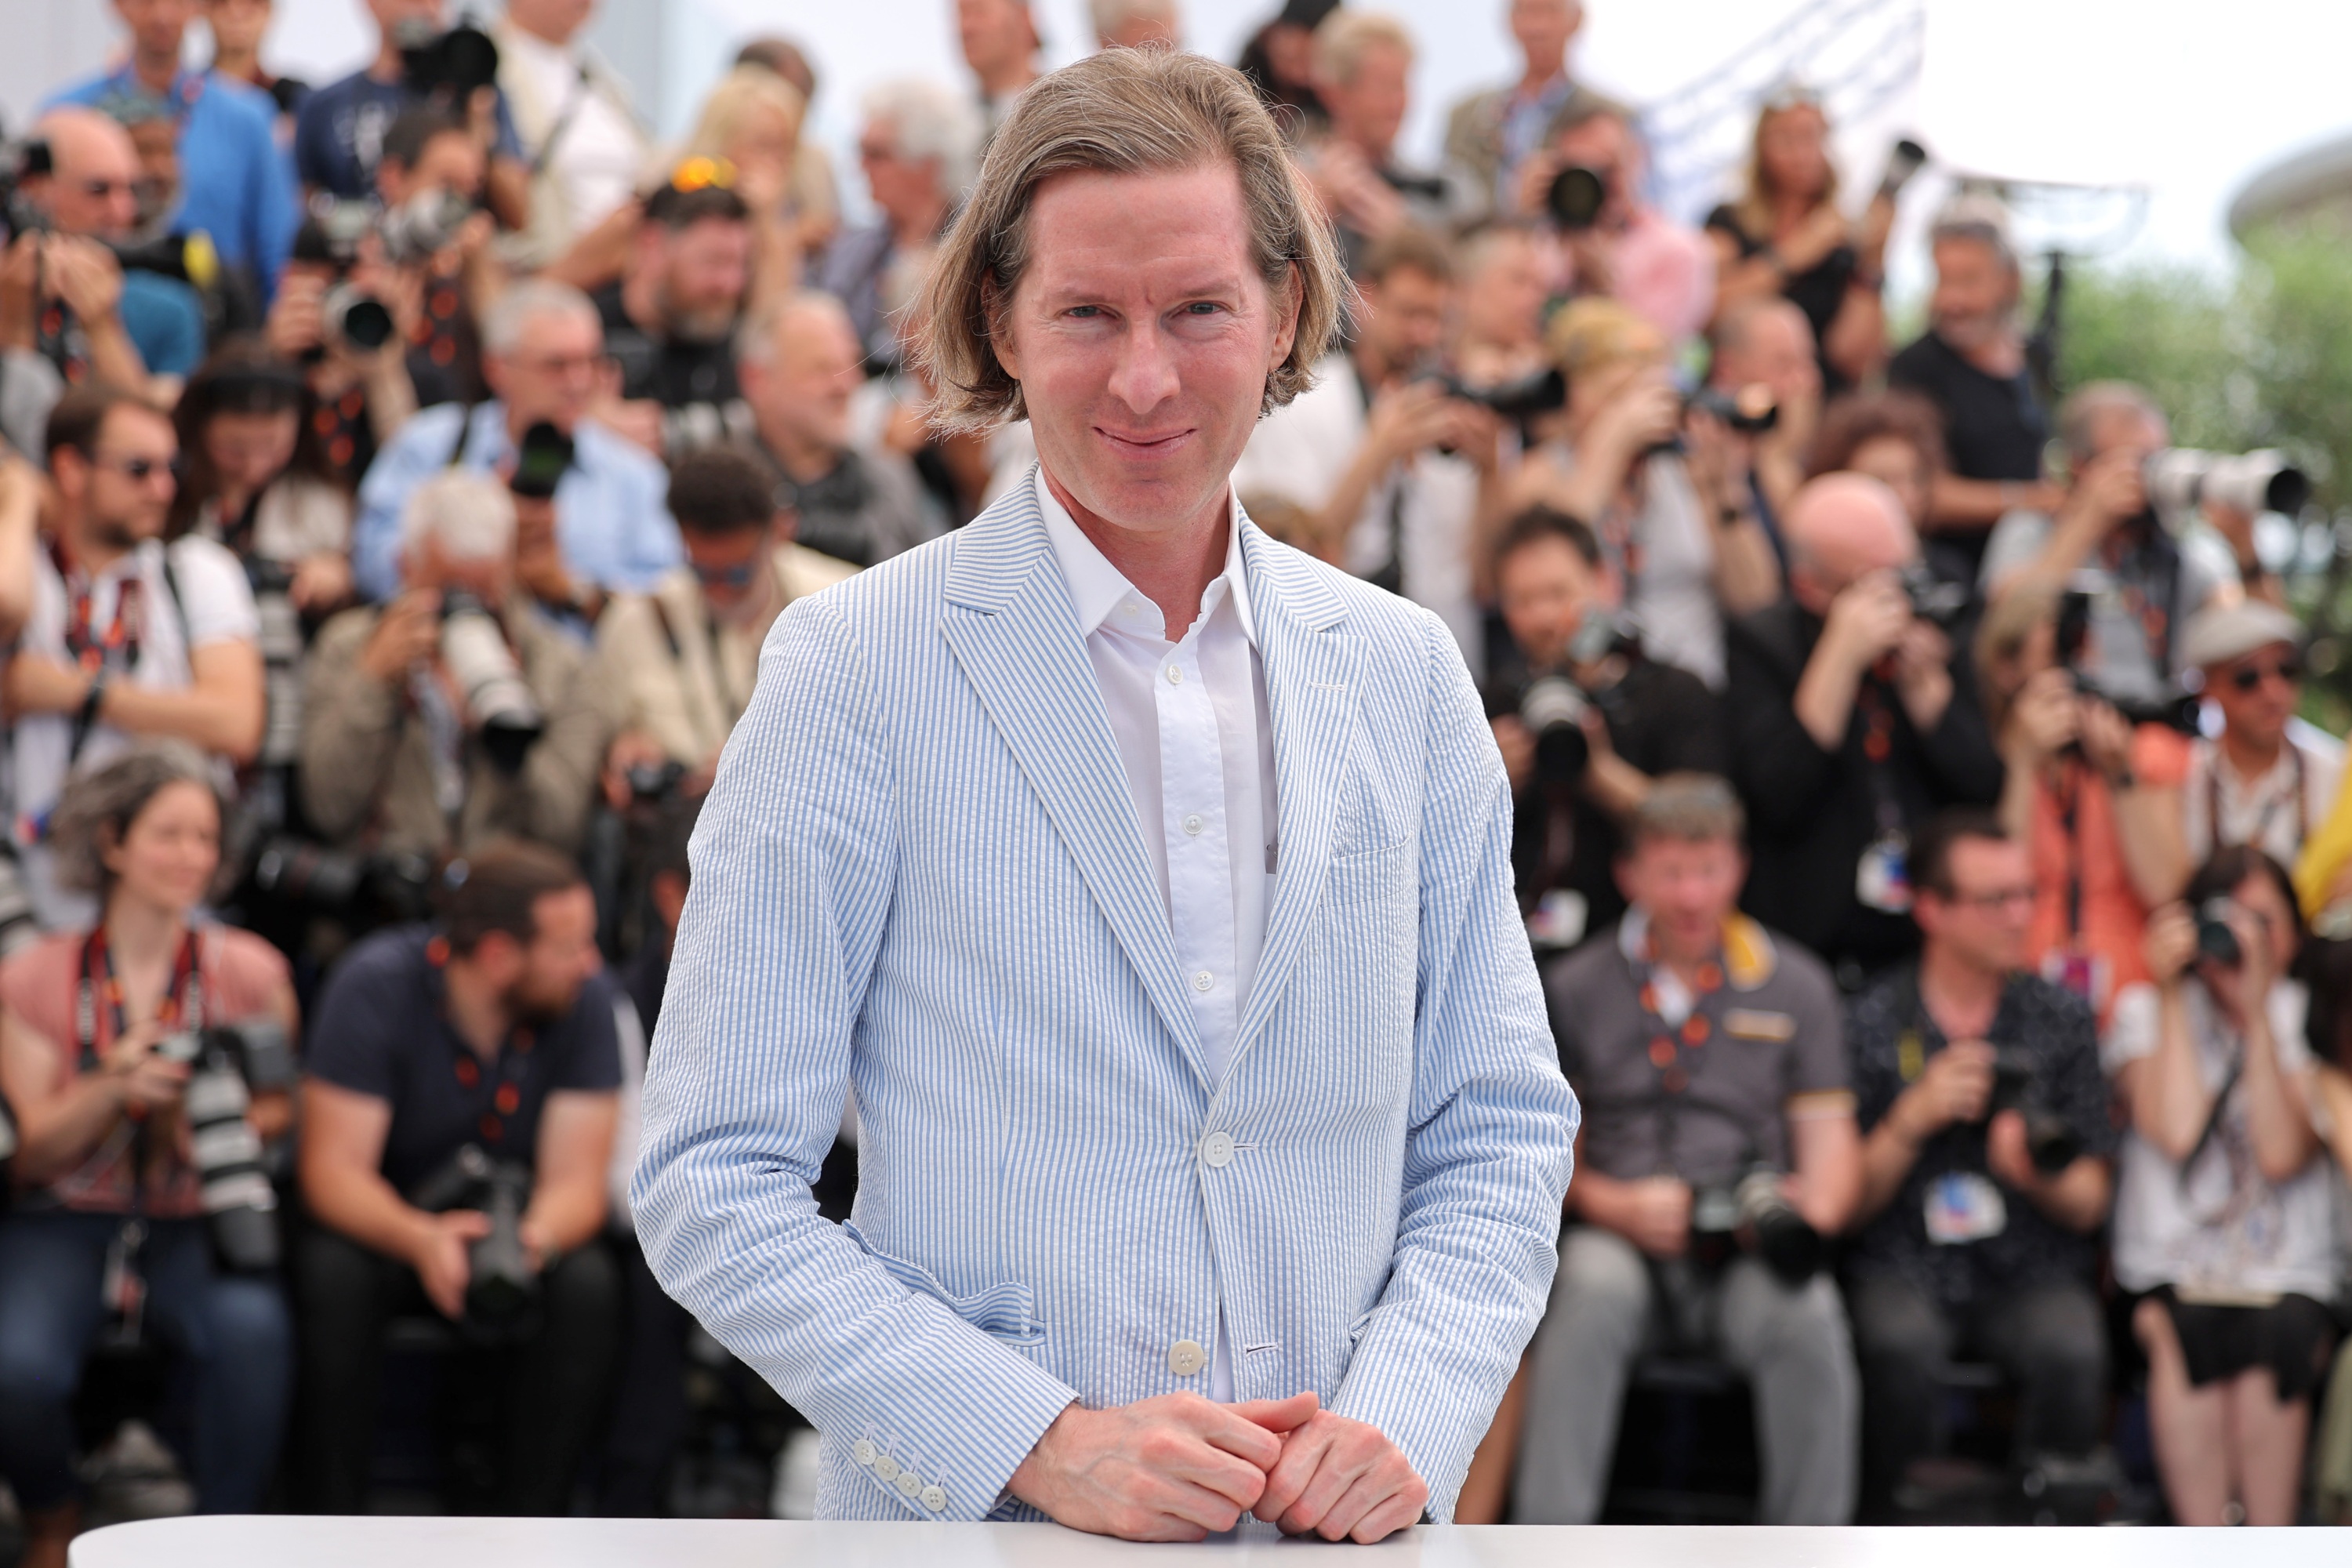 CANNES, FRANCE - MAY 24: Director Wes Anderson attends the 